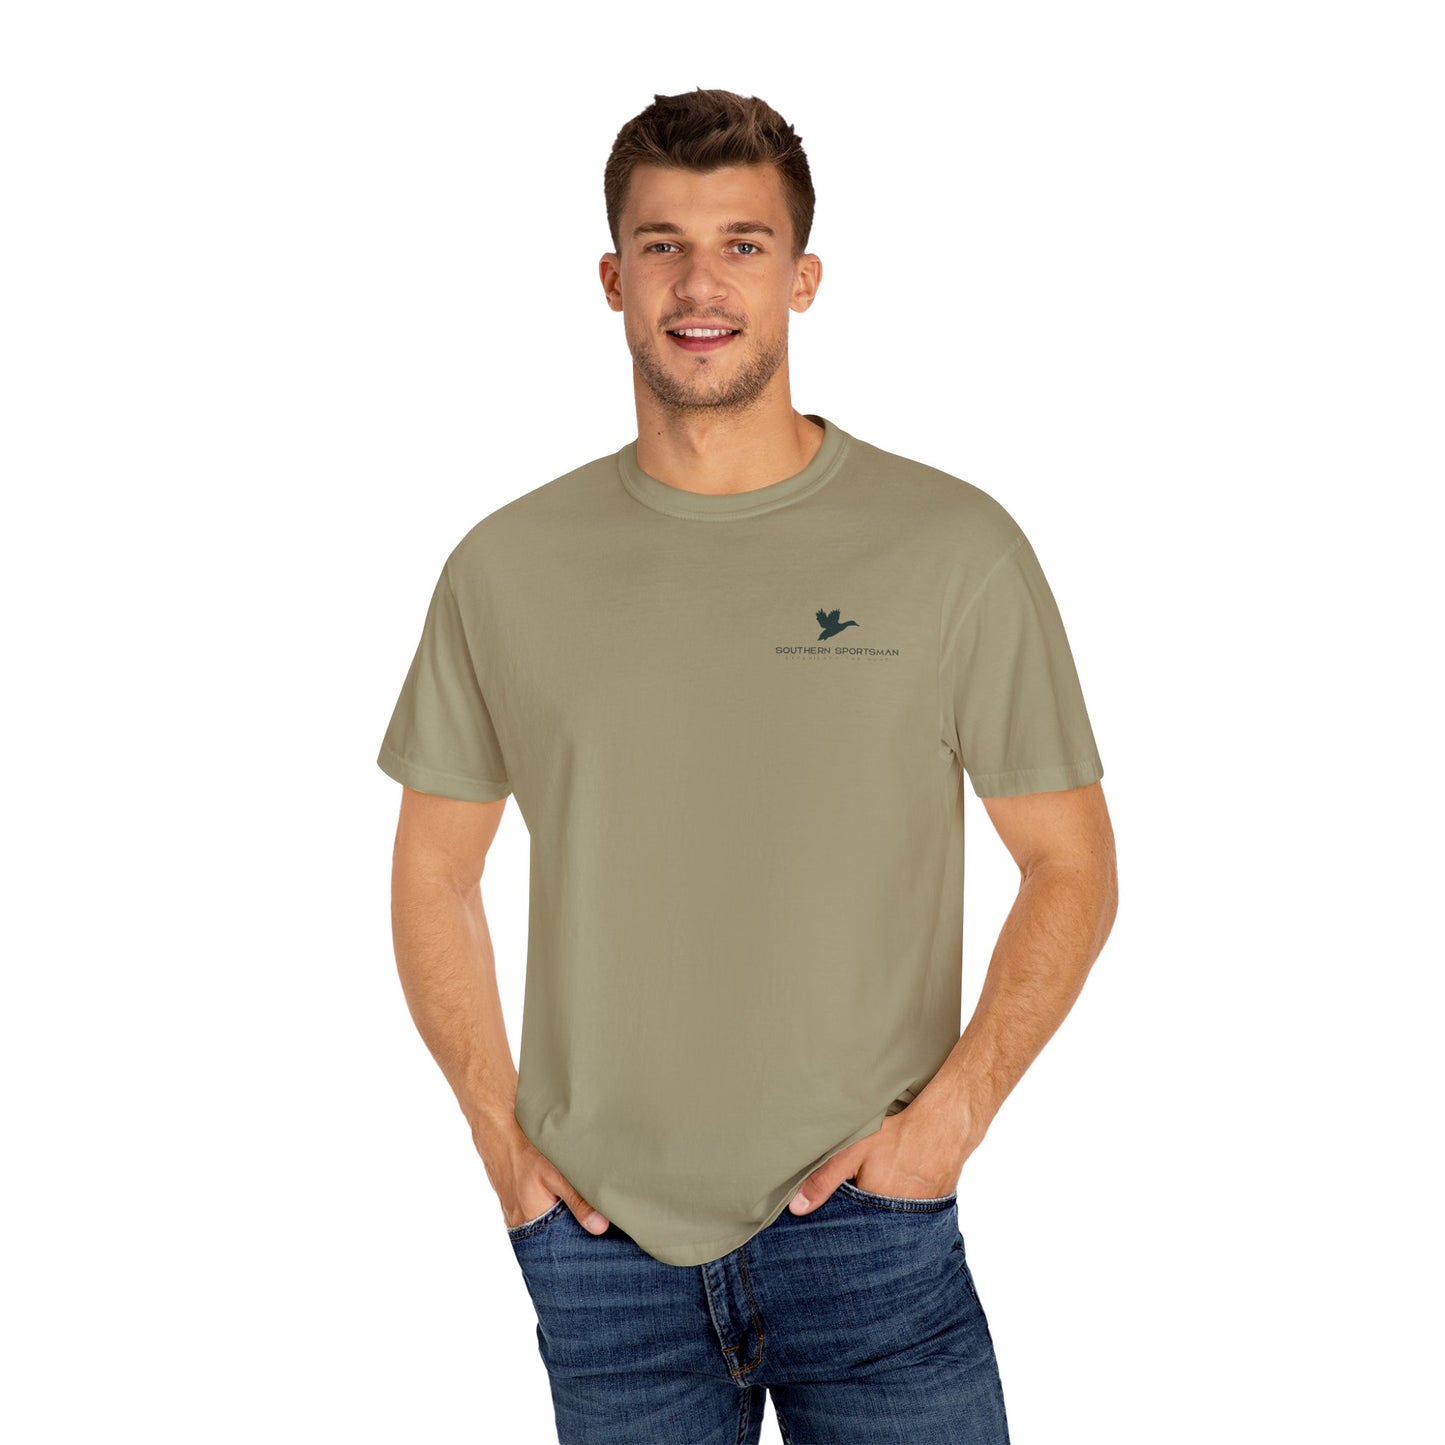 Wild Round Flush T-Shirt in Comfort Colors